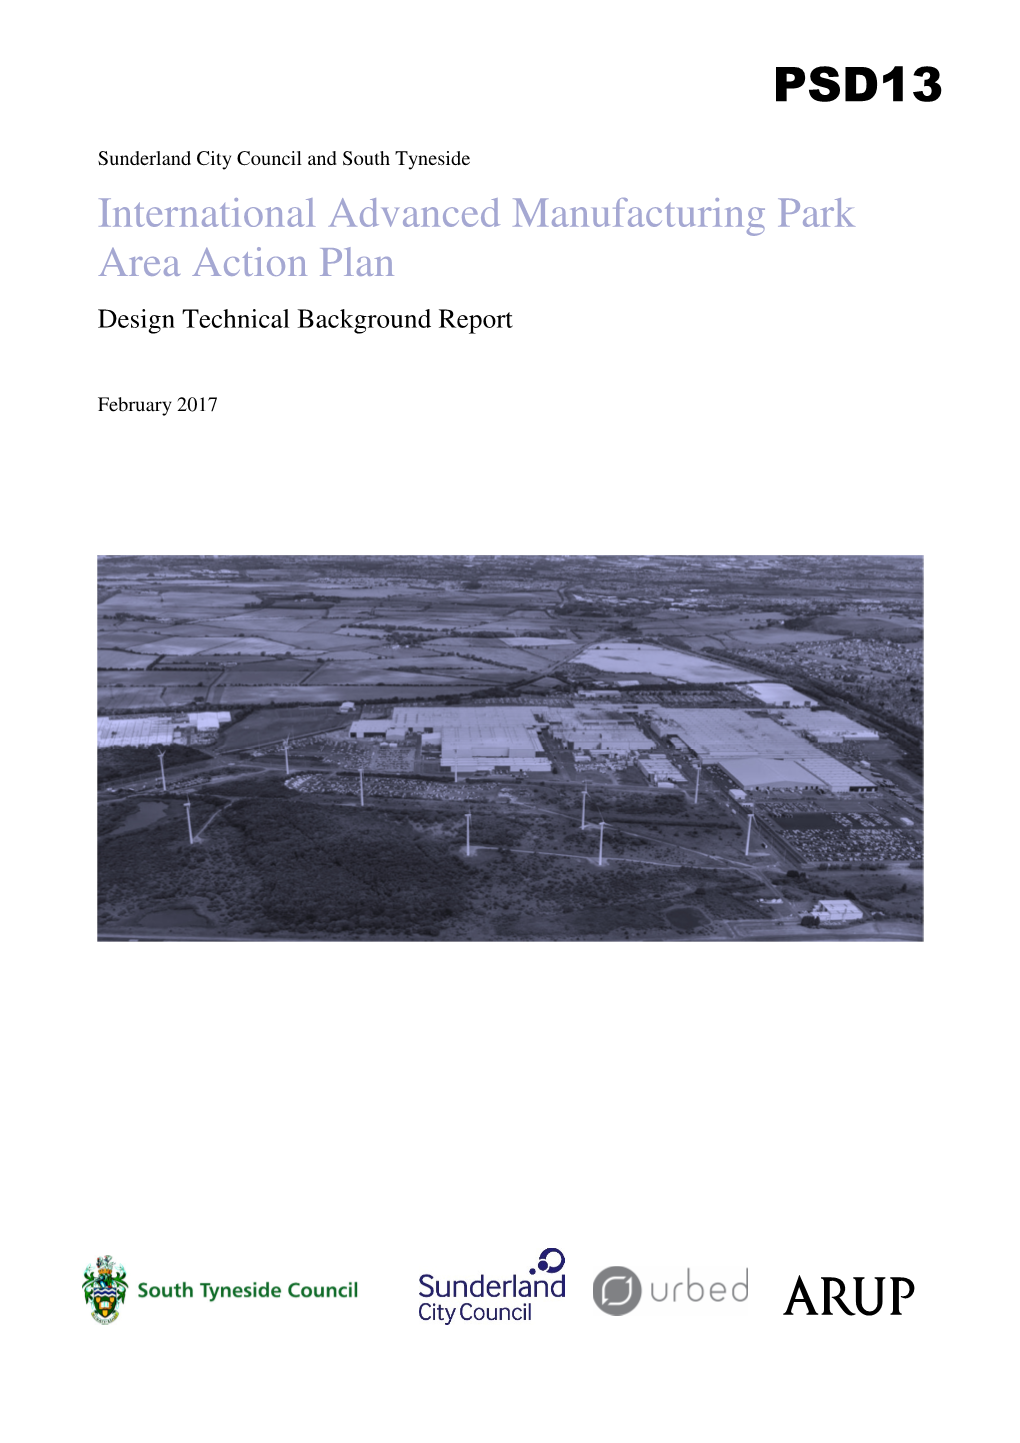 International Advanced Manufacturing Park Area Action Plan Design Technical Background Report